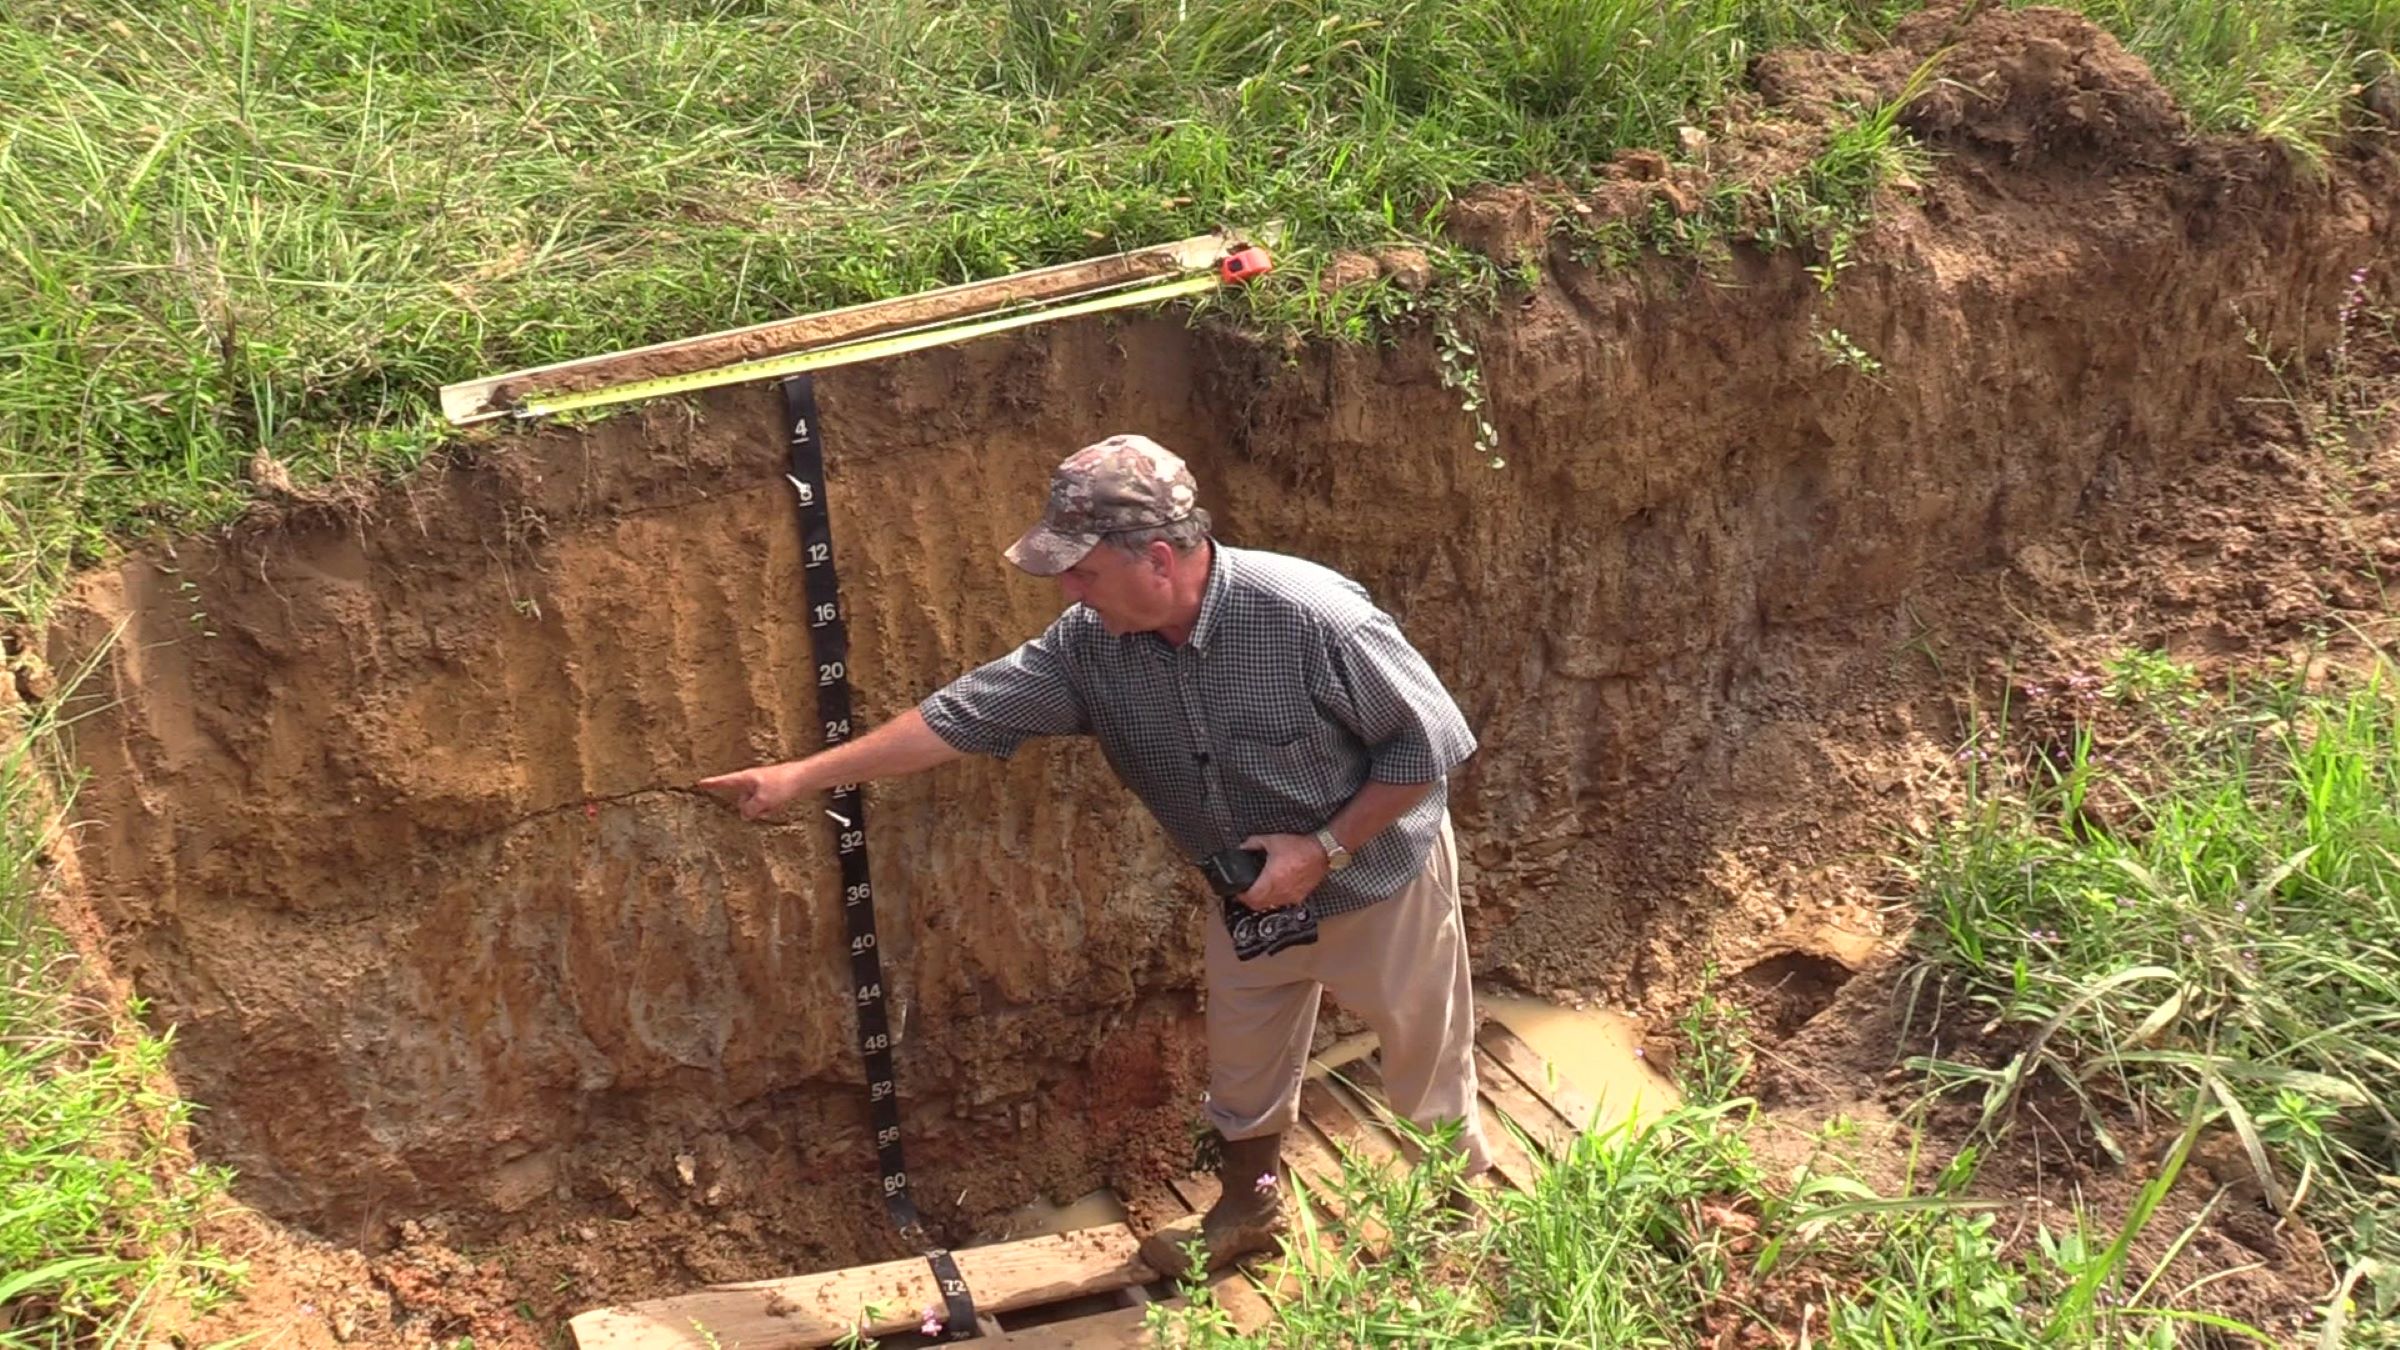 UK specialists will visit two contrasting soil pits that represent most of the soil resources utilized for crop production in western Kentucky. Photo provided by Lori Rogers.